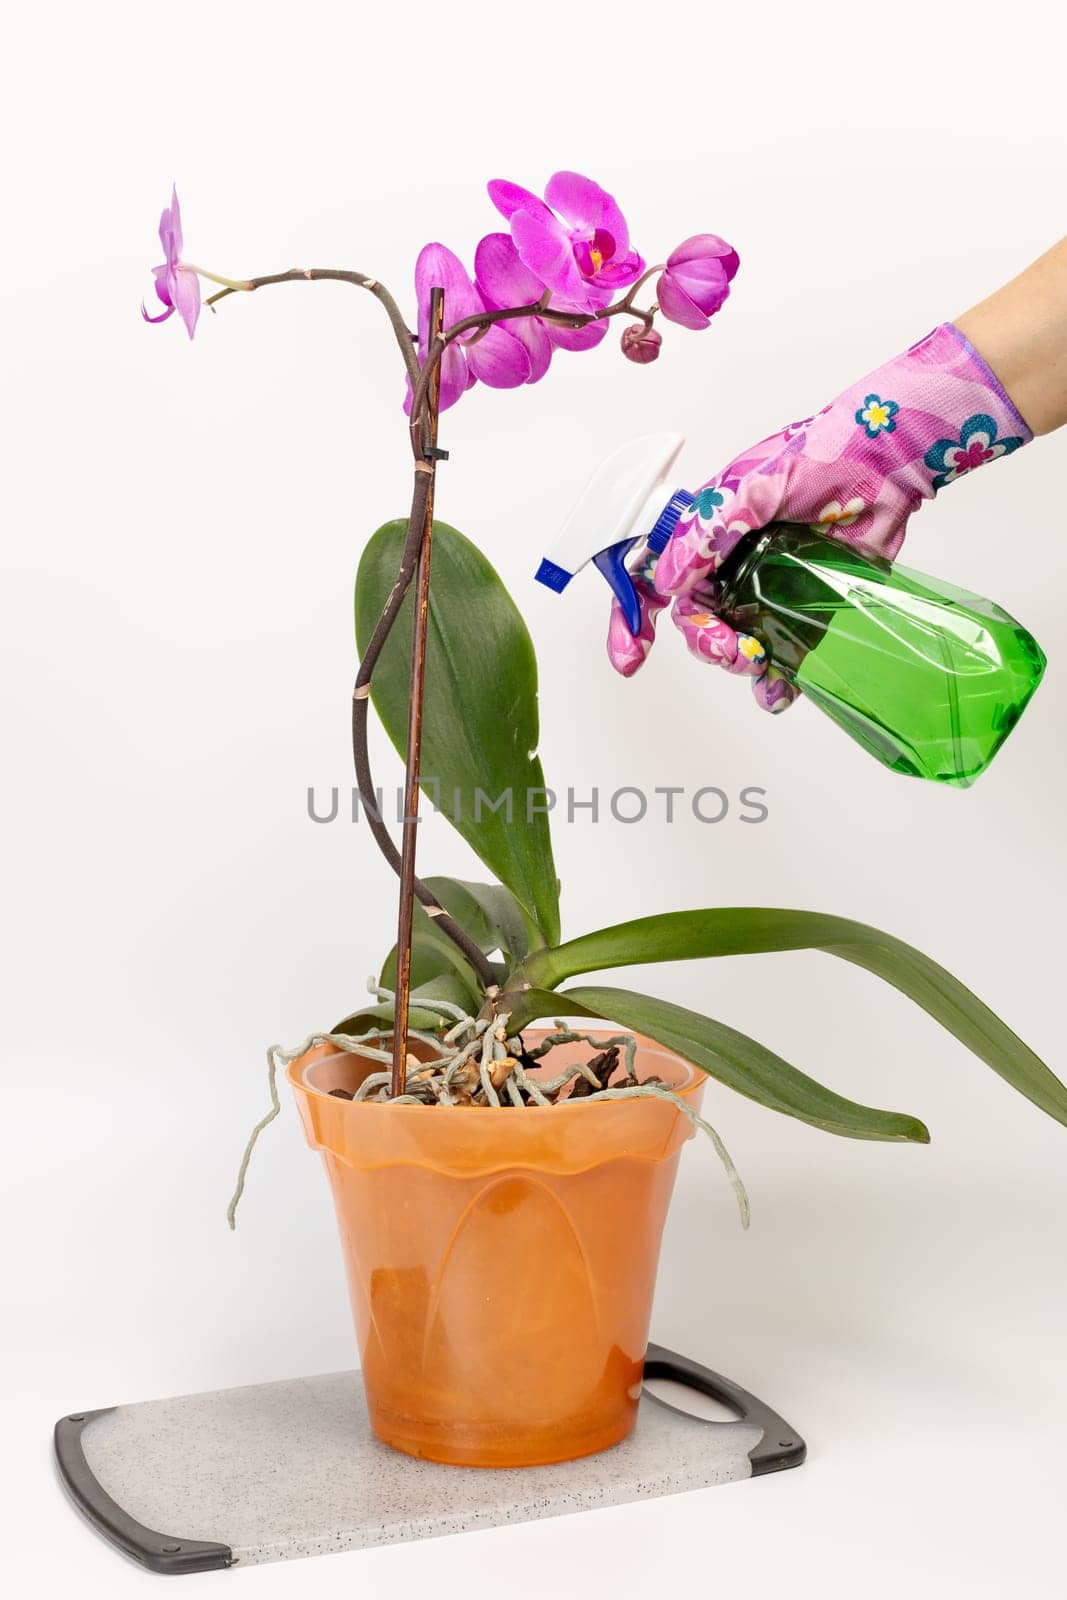 Woman in rubber gloves taking care of house plants and spraying violet phalaenopsis orchid flowers with water from a spray bottle. The concept of house gardening and flower care.